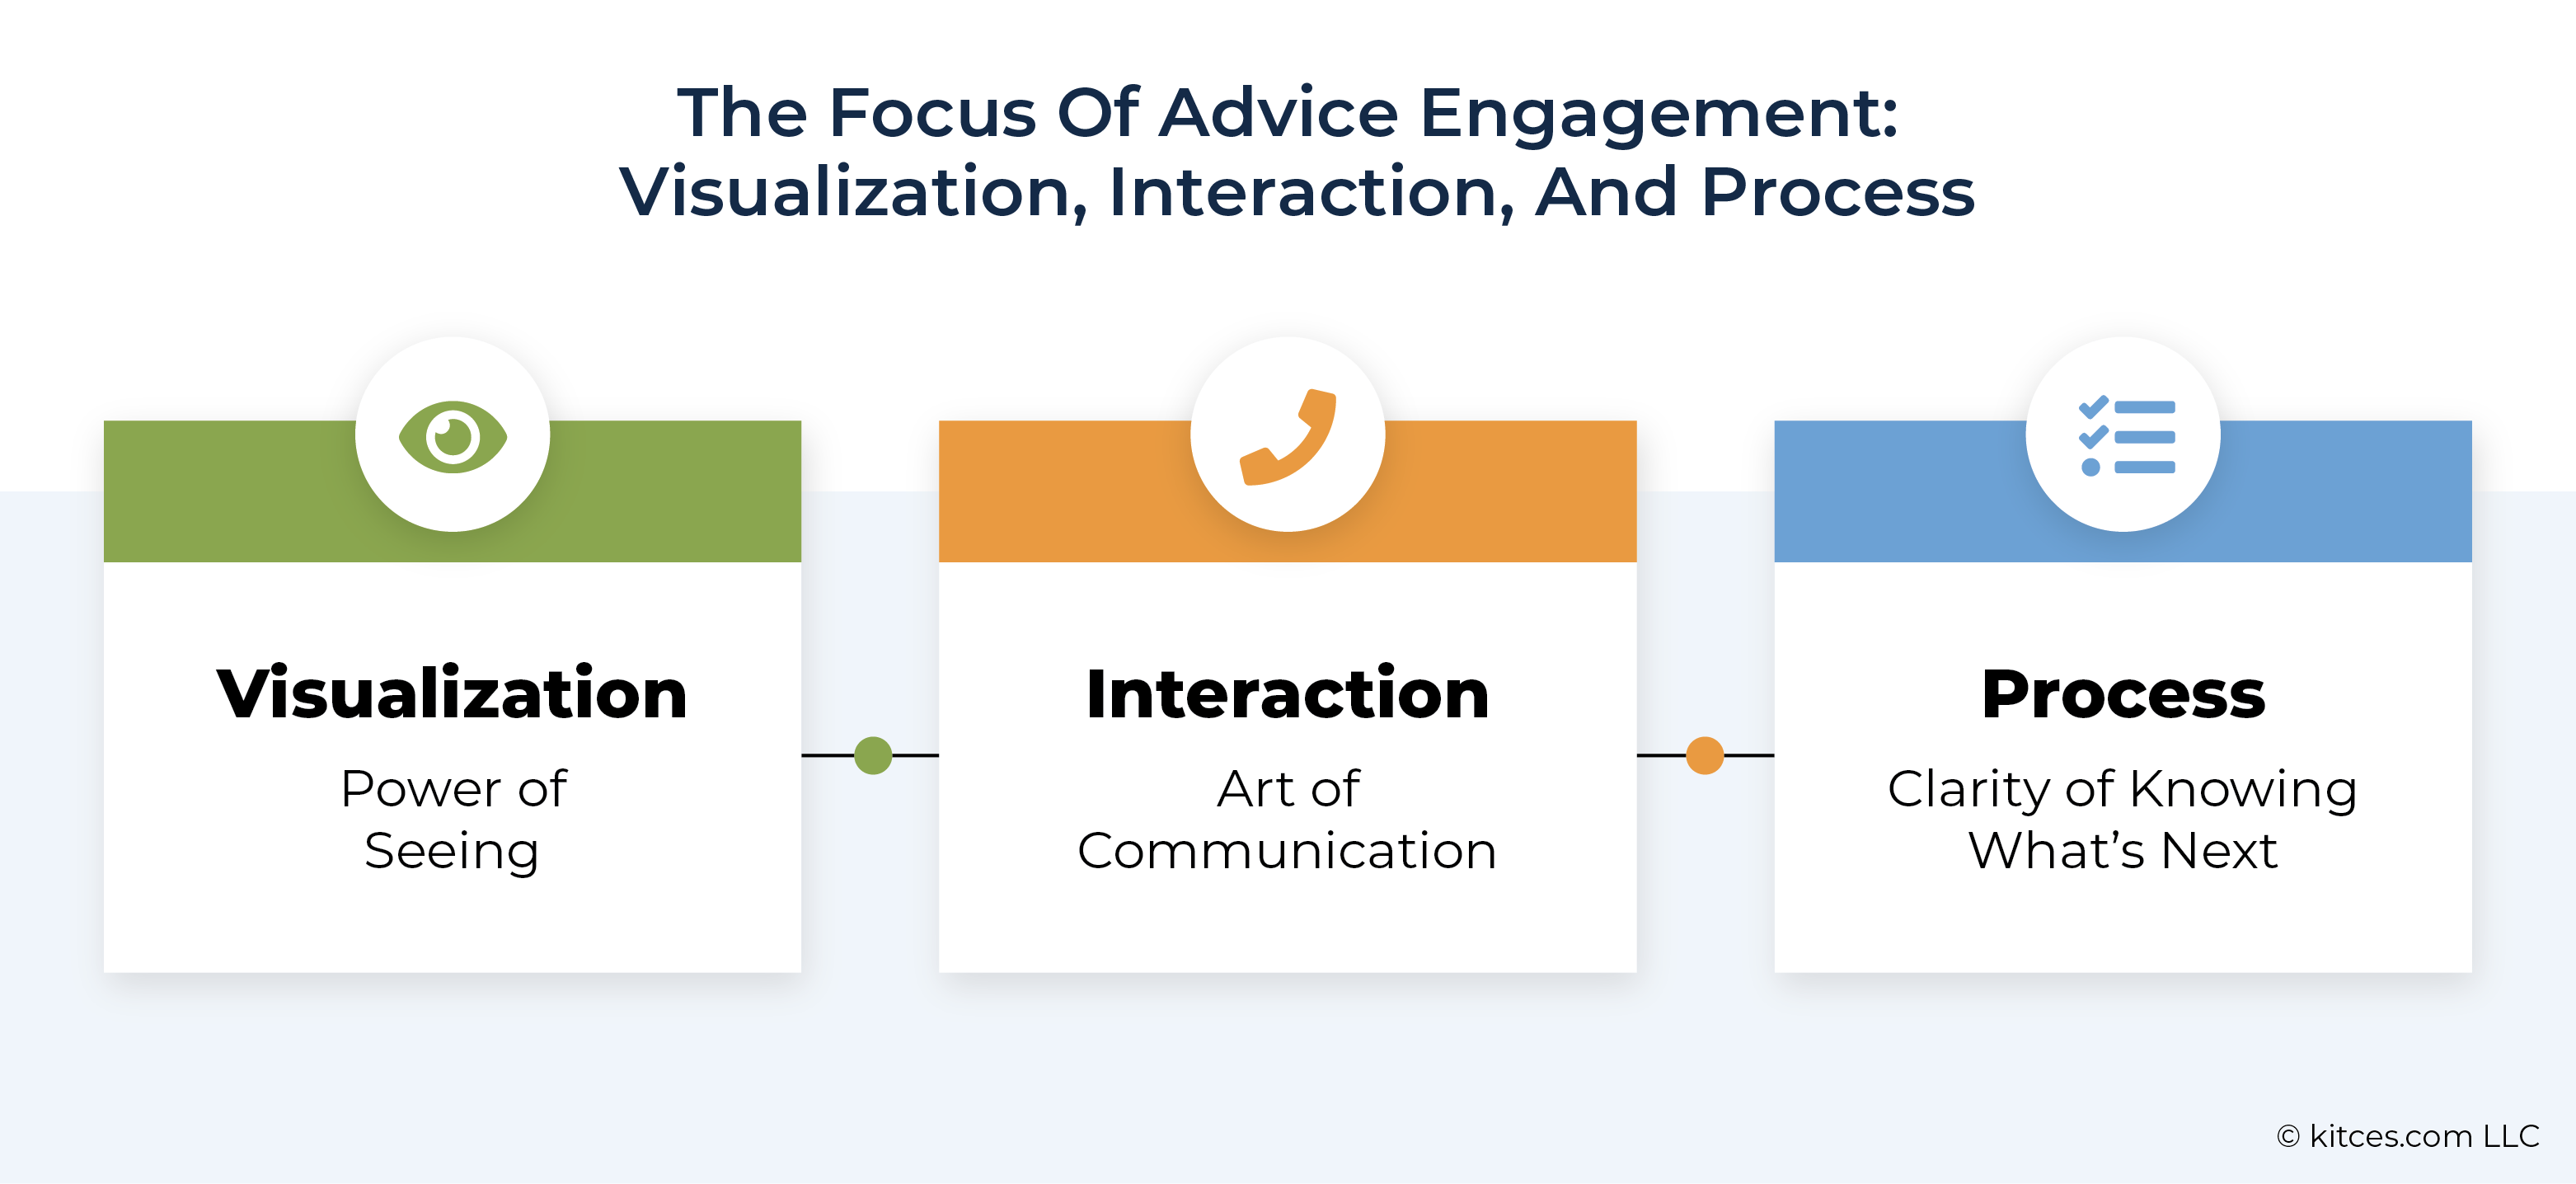 The Focus Of Advice Engagement